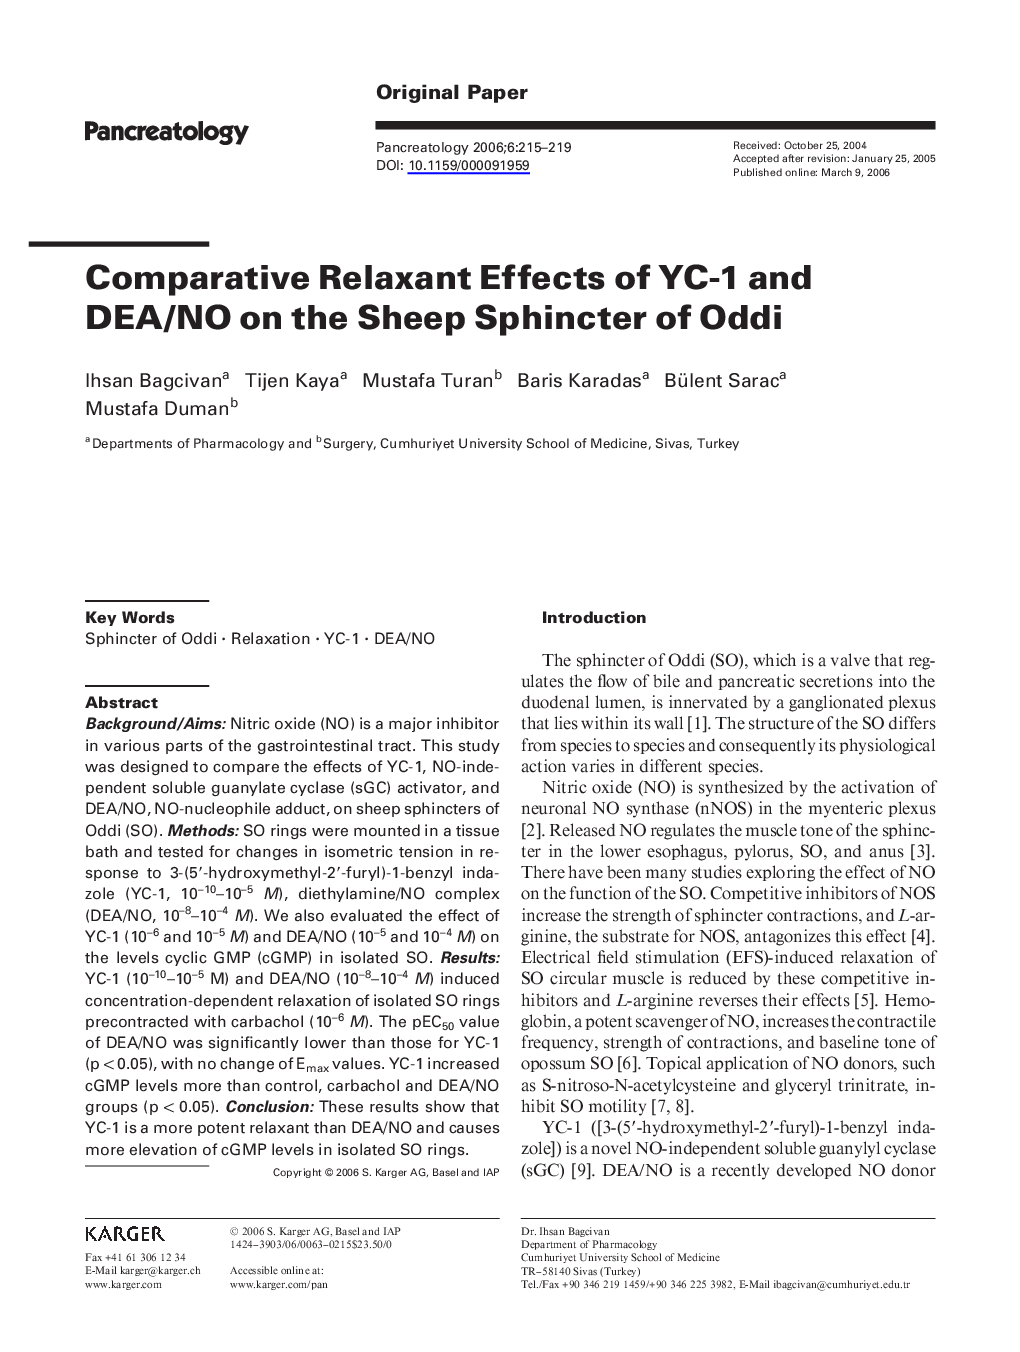 Comparative relaxant effects of YC-1 and DEA/NO on the sheep sphincter of Oddi